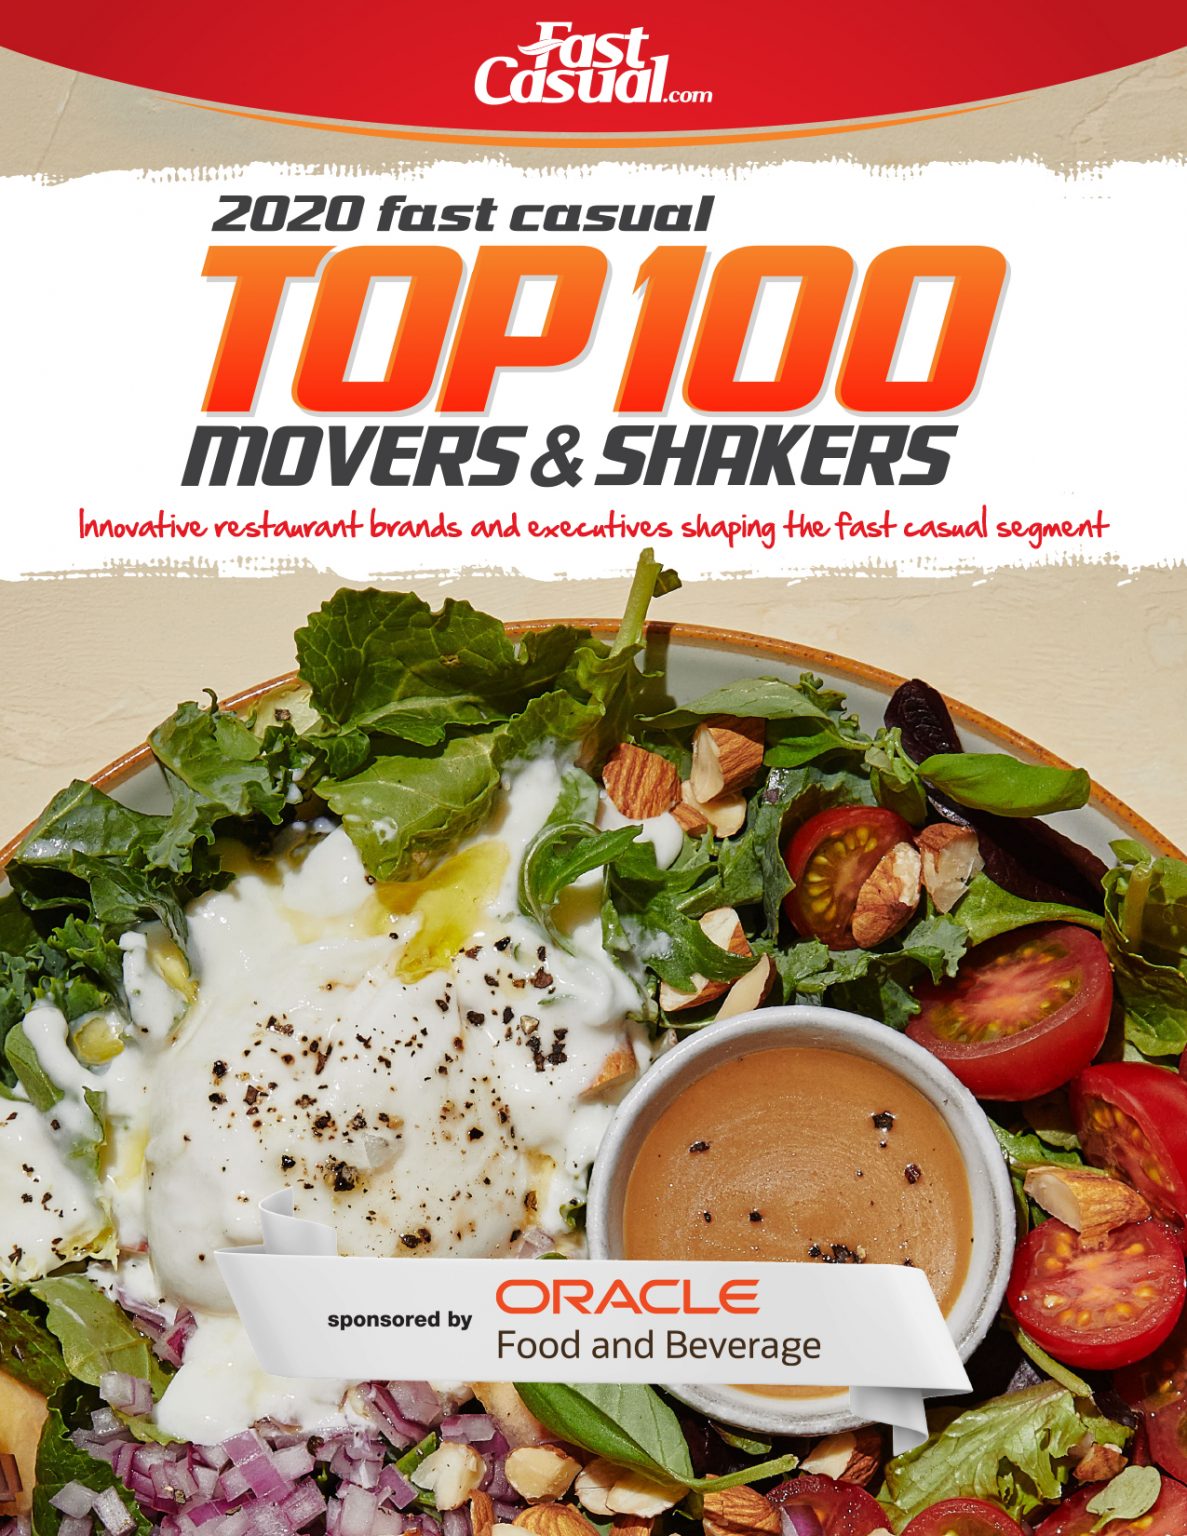 2020 Fast Casual Top 100 Movers & Shakers